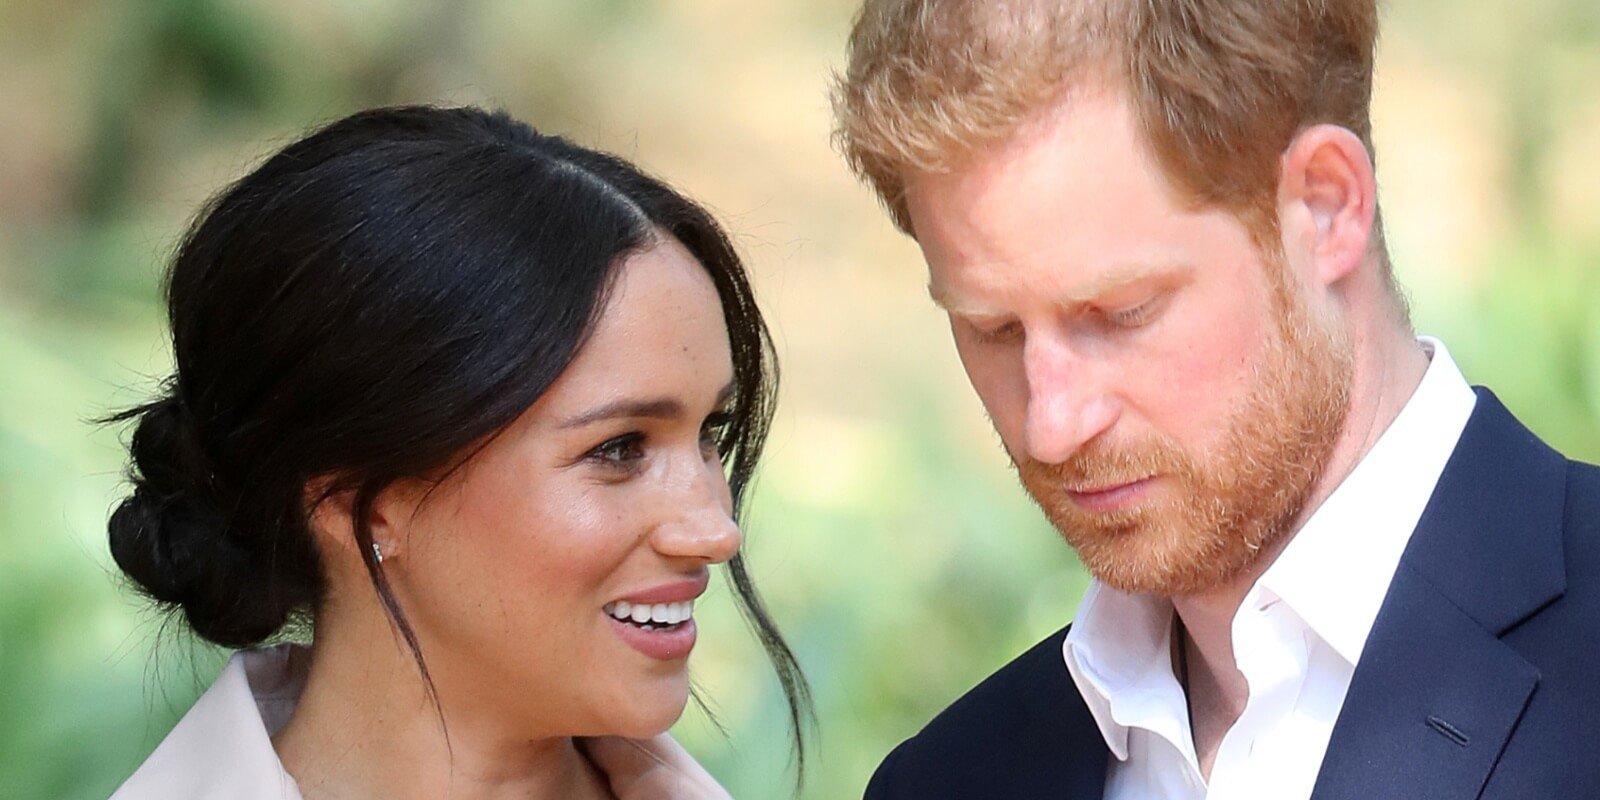 Meghan Markle and Prince Harry photographed in 2019 in Johannesburg, South Africa.